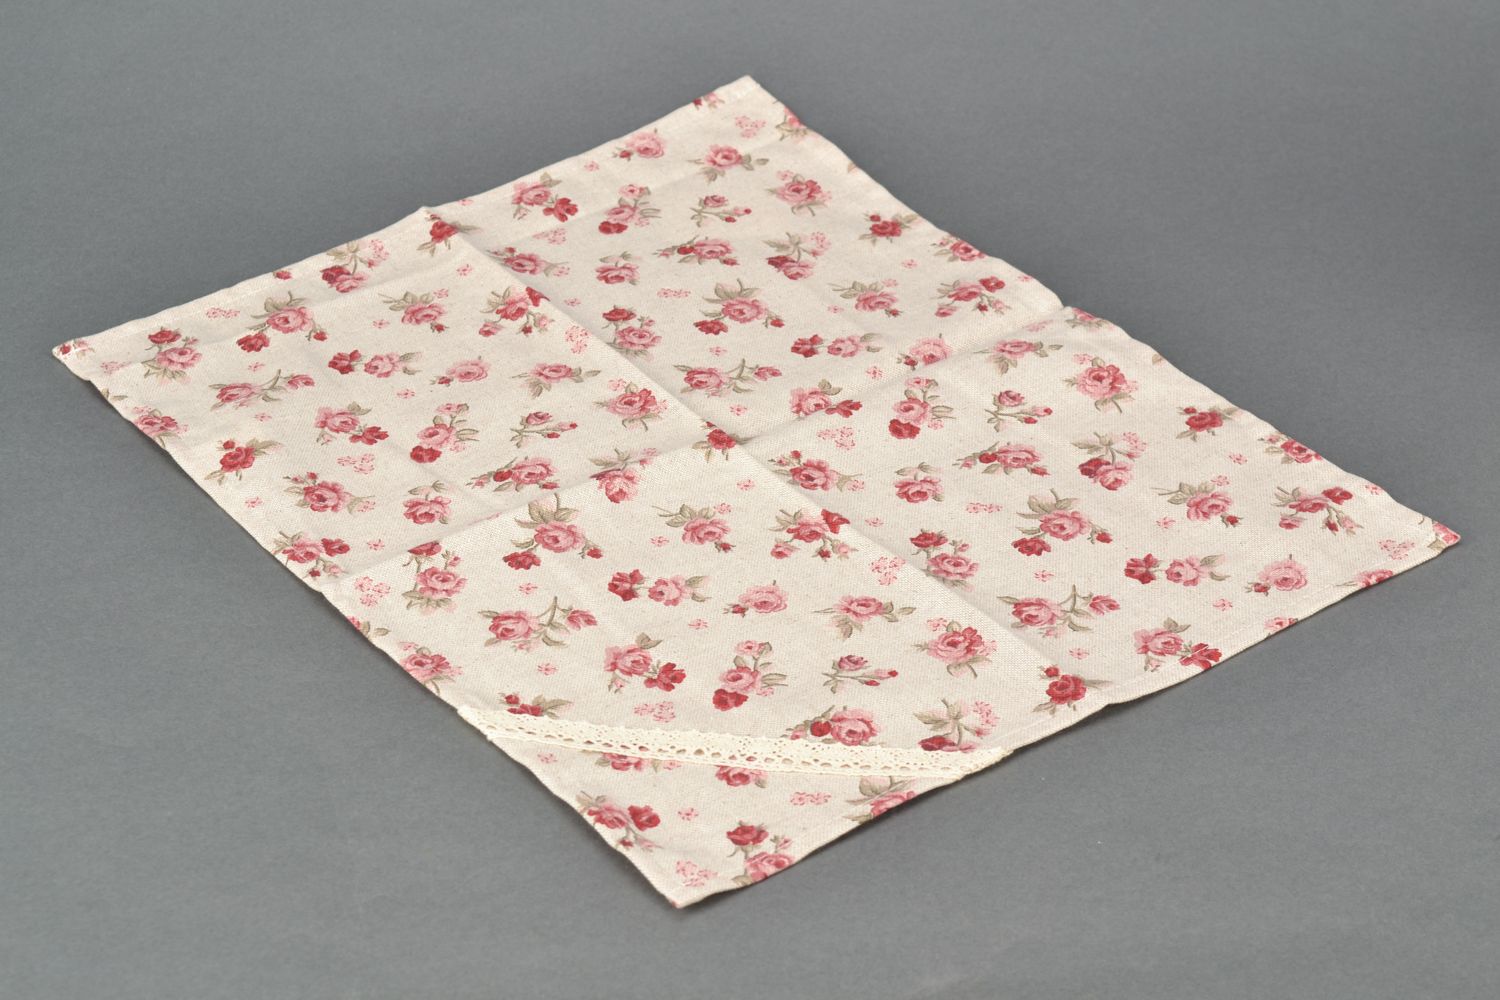 Decorative napkin made of cotton and polyamide fabric with floral print and lace photo 4